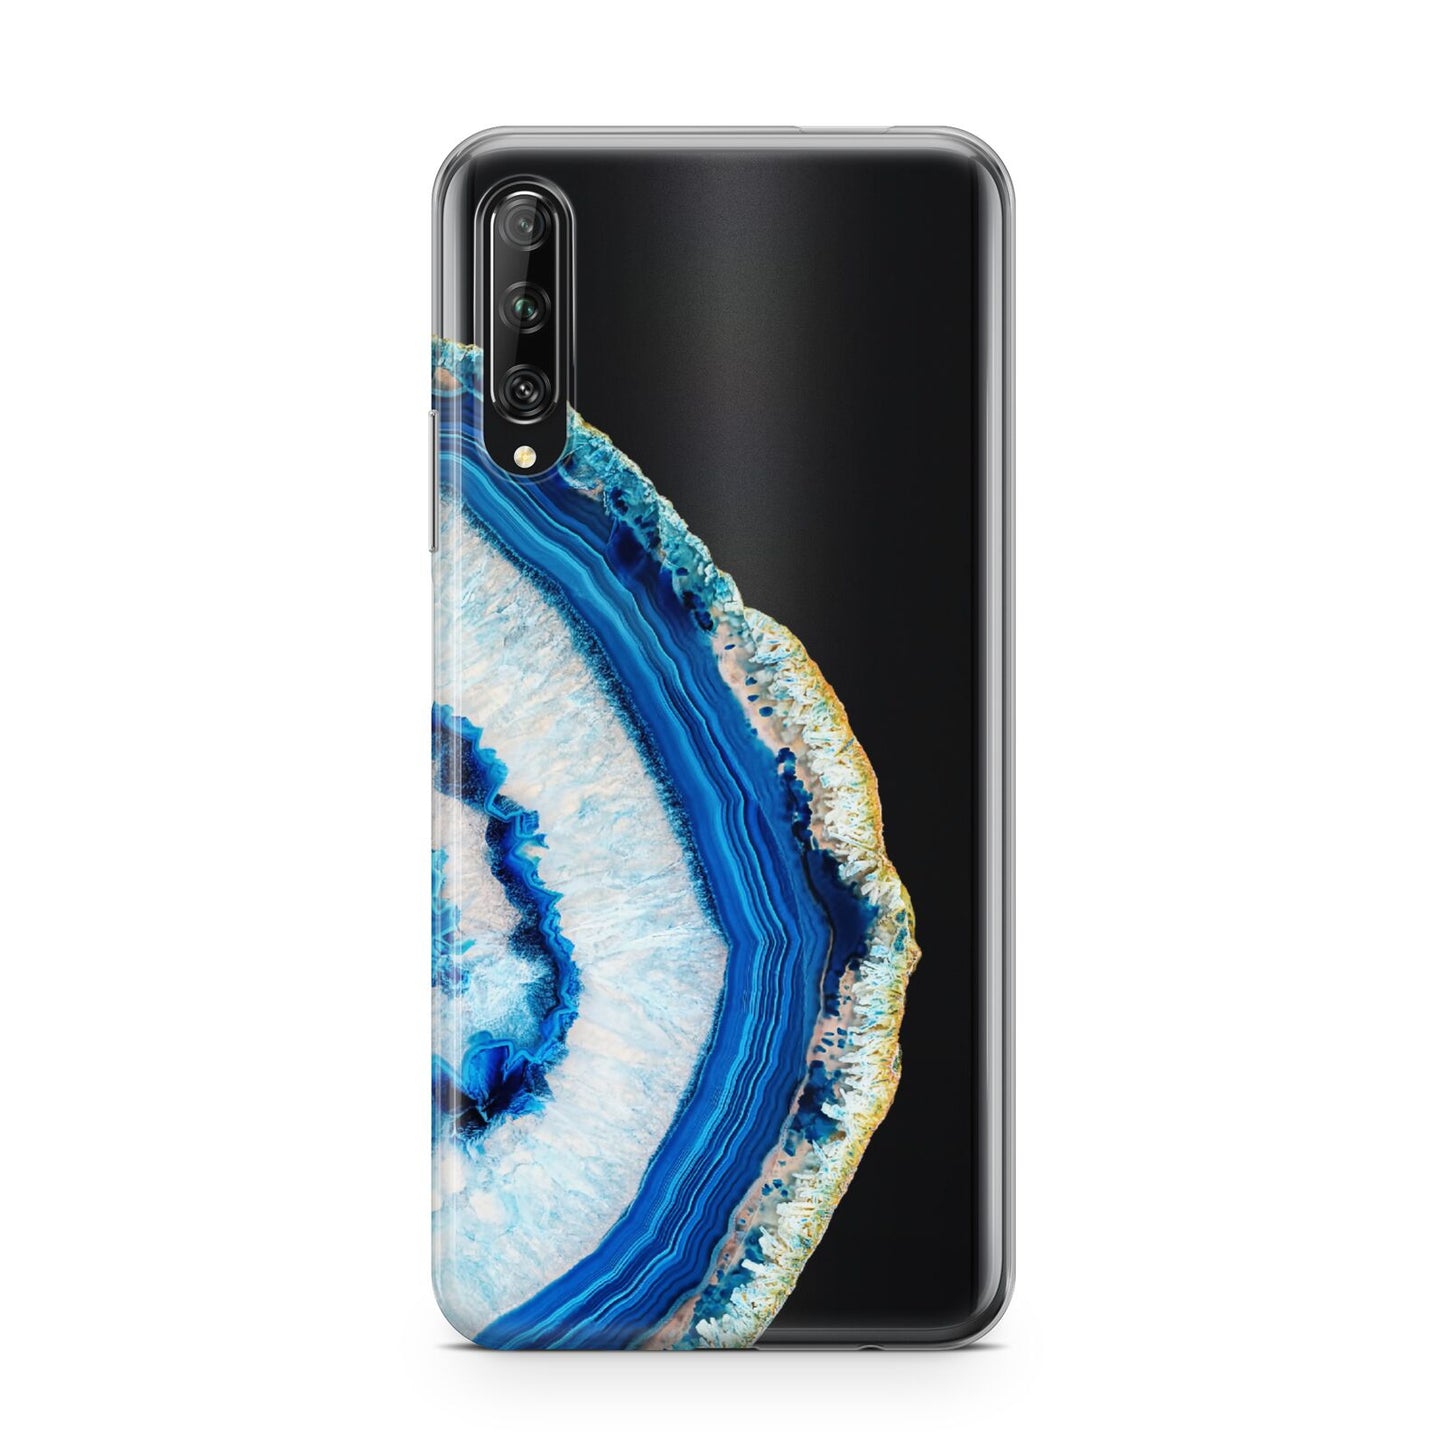 Agate Dark Blue and Turquoise Huawei P Smart Pro 2019